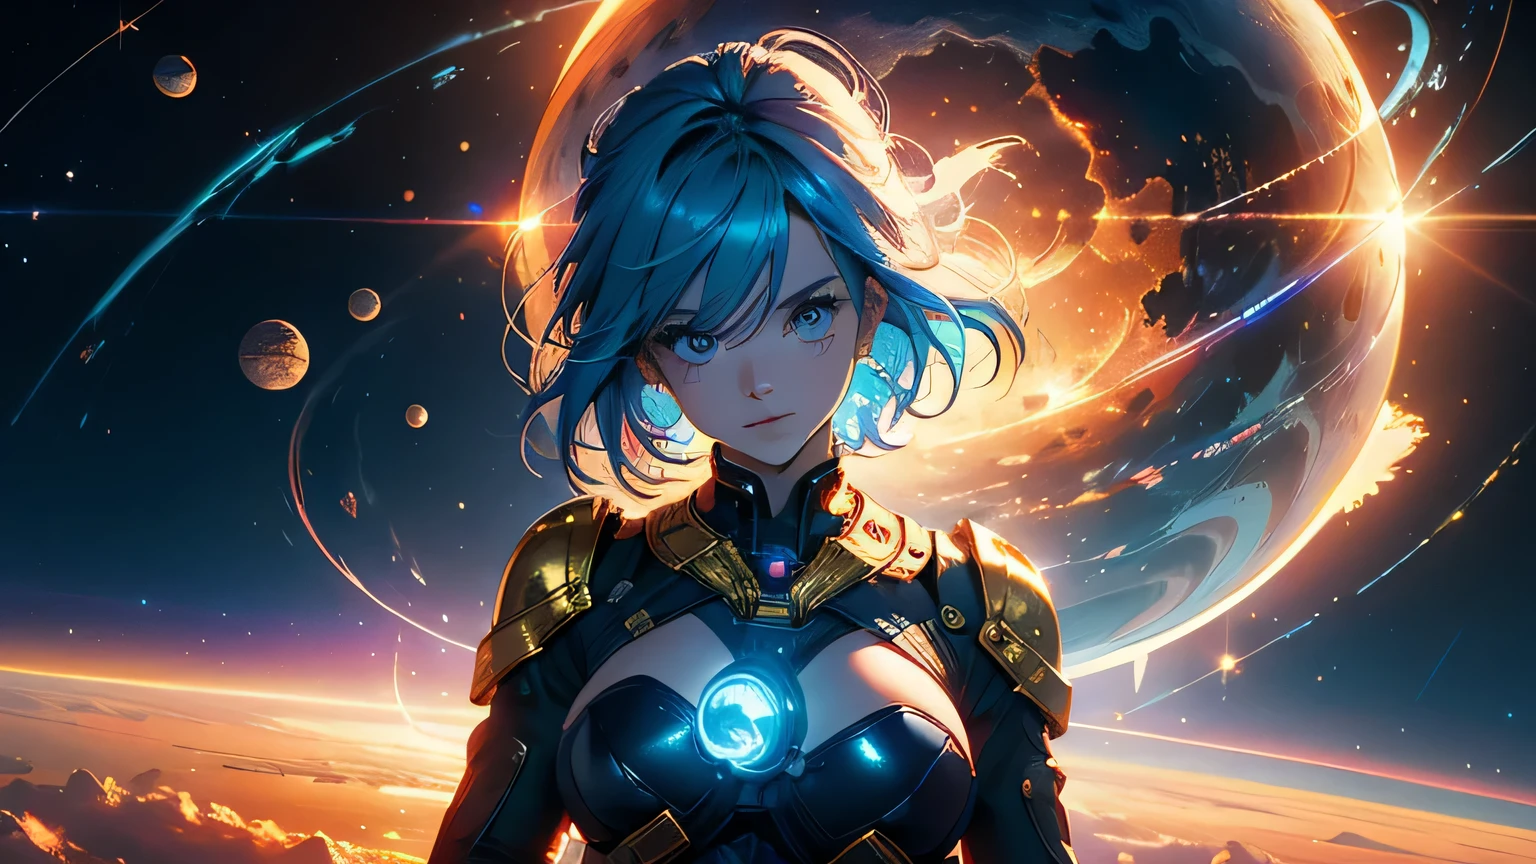 (masterpiece), best quality, a cute girl floating in the space holding a planet, ((holding)), sphere, ((glow, planet glow)), perfect face, expressive eyes, (blue Tight crop top gold leather suit), (big breast), (open half breast), , spiral galaxy, astronomy wallpaper, happy, colorful, exciting, gorgeous, blue giant star, cowboy shot, cosmic, cosmos 4k, shiny, perfect light, glowing sphere BREAK is a cute girl on space, she is holding a glwoing sphere with the two hands, she is wearing a white space suit, she has blue hair, red eyes, red giant star, sun like star, shine, BREAK vivid colors, bright,shiny, cool colors, dramatic lighting, artistic, creative, digital art, wallpaper, (glowing eyeagical, impossible, good vibes, good emotions, adventure, (solo, alone,1girl), big breast, open half breast